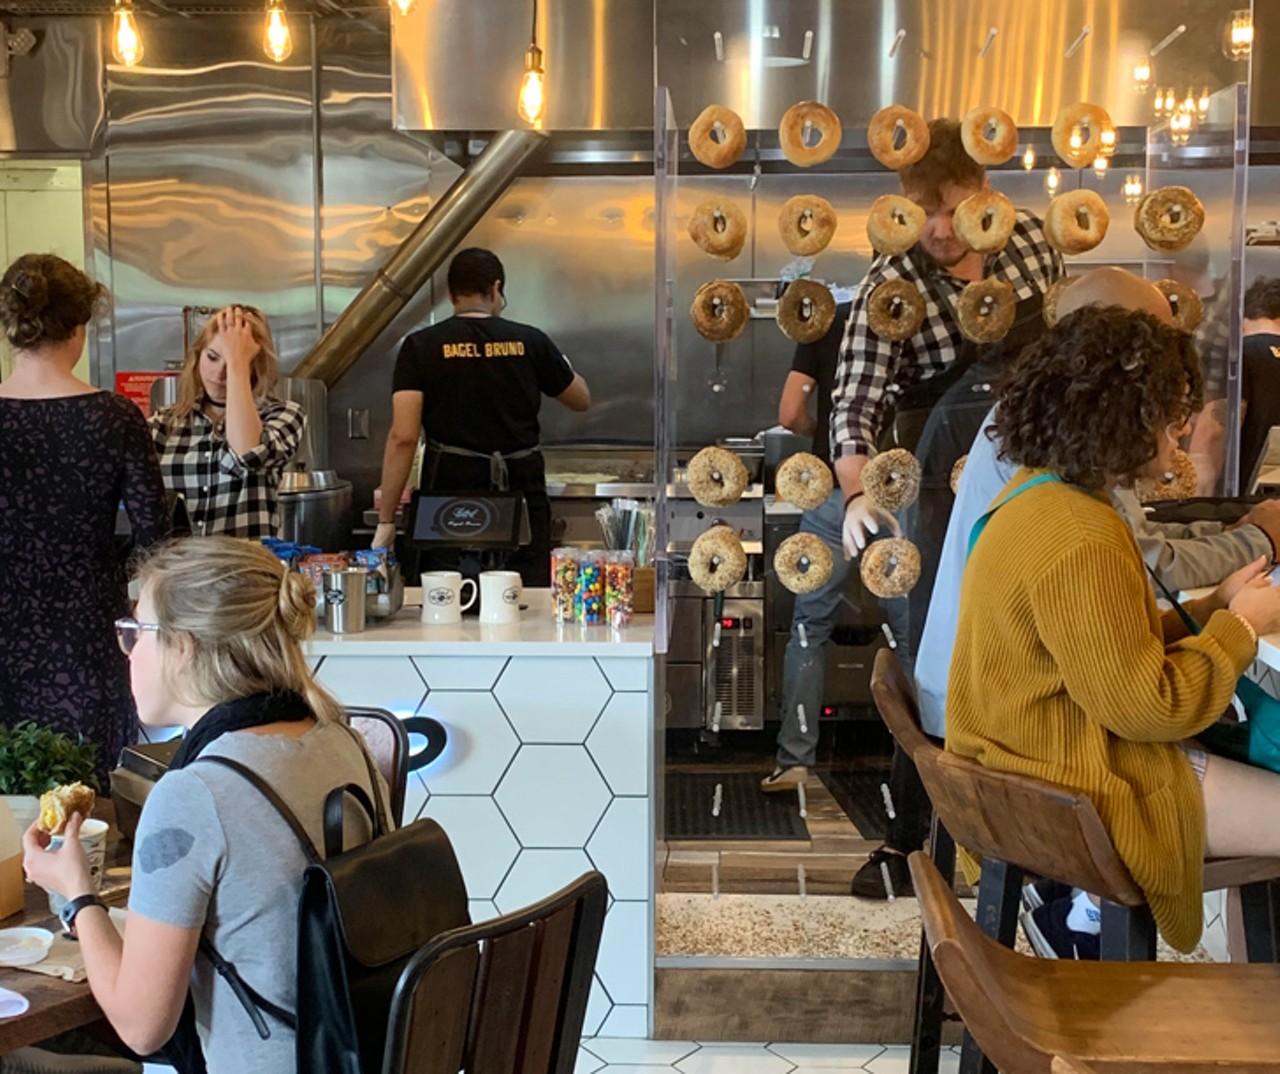 Notable 2019 opening: Bagel Bruno  
3405 Edgewater Dr., 407-601-2914
Bagel Bruno, the much-anticipated collab between Pizza Bruno and Foxtail Coffee, forst opened in November, offering six "Montreal-style" bagel varieties, all vegan. The dough contains no egg or honey, is naturally leavened, and is poached in dark brown sugar before being hearth-baked. Six varieties will initially be served &#151; plain, salt, rye, sesame seed, everything and cinnamon-golden raisin &#151; after which, Zacchini says, seasonal varieties will make their way onto the menu. A bevy of sammies (and Foxtail's coffees, of course) will also be served.
Photo by Allysha Willison